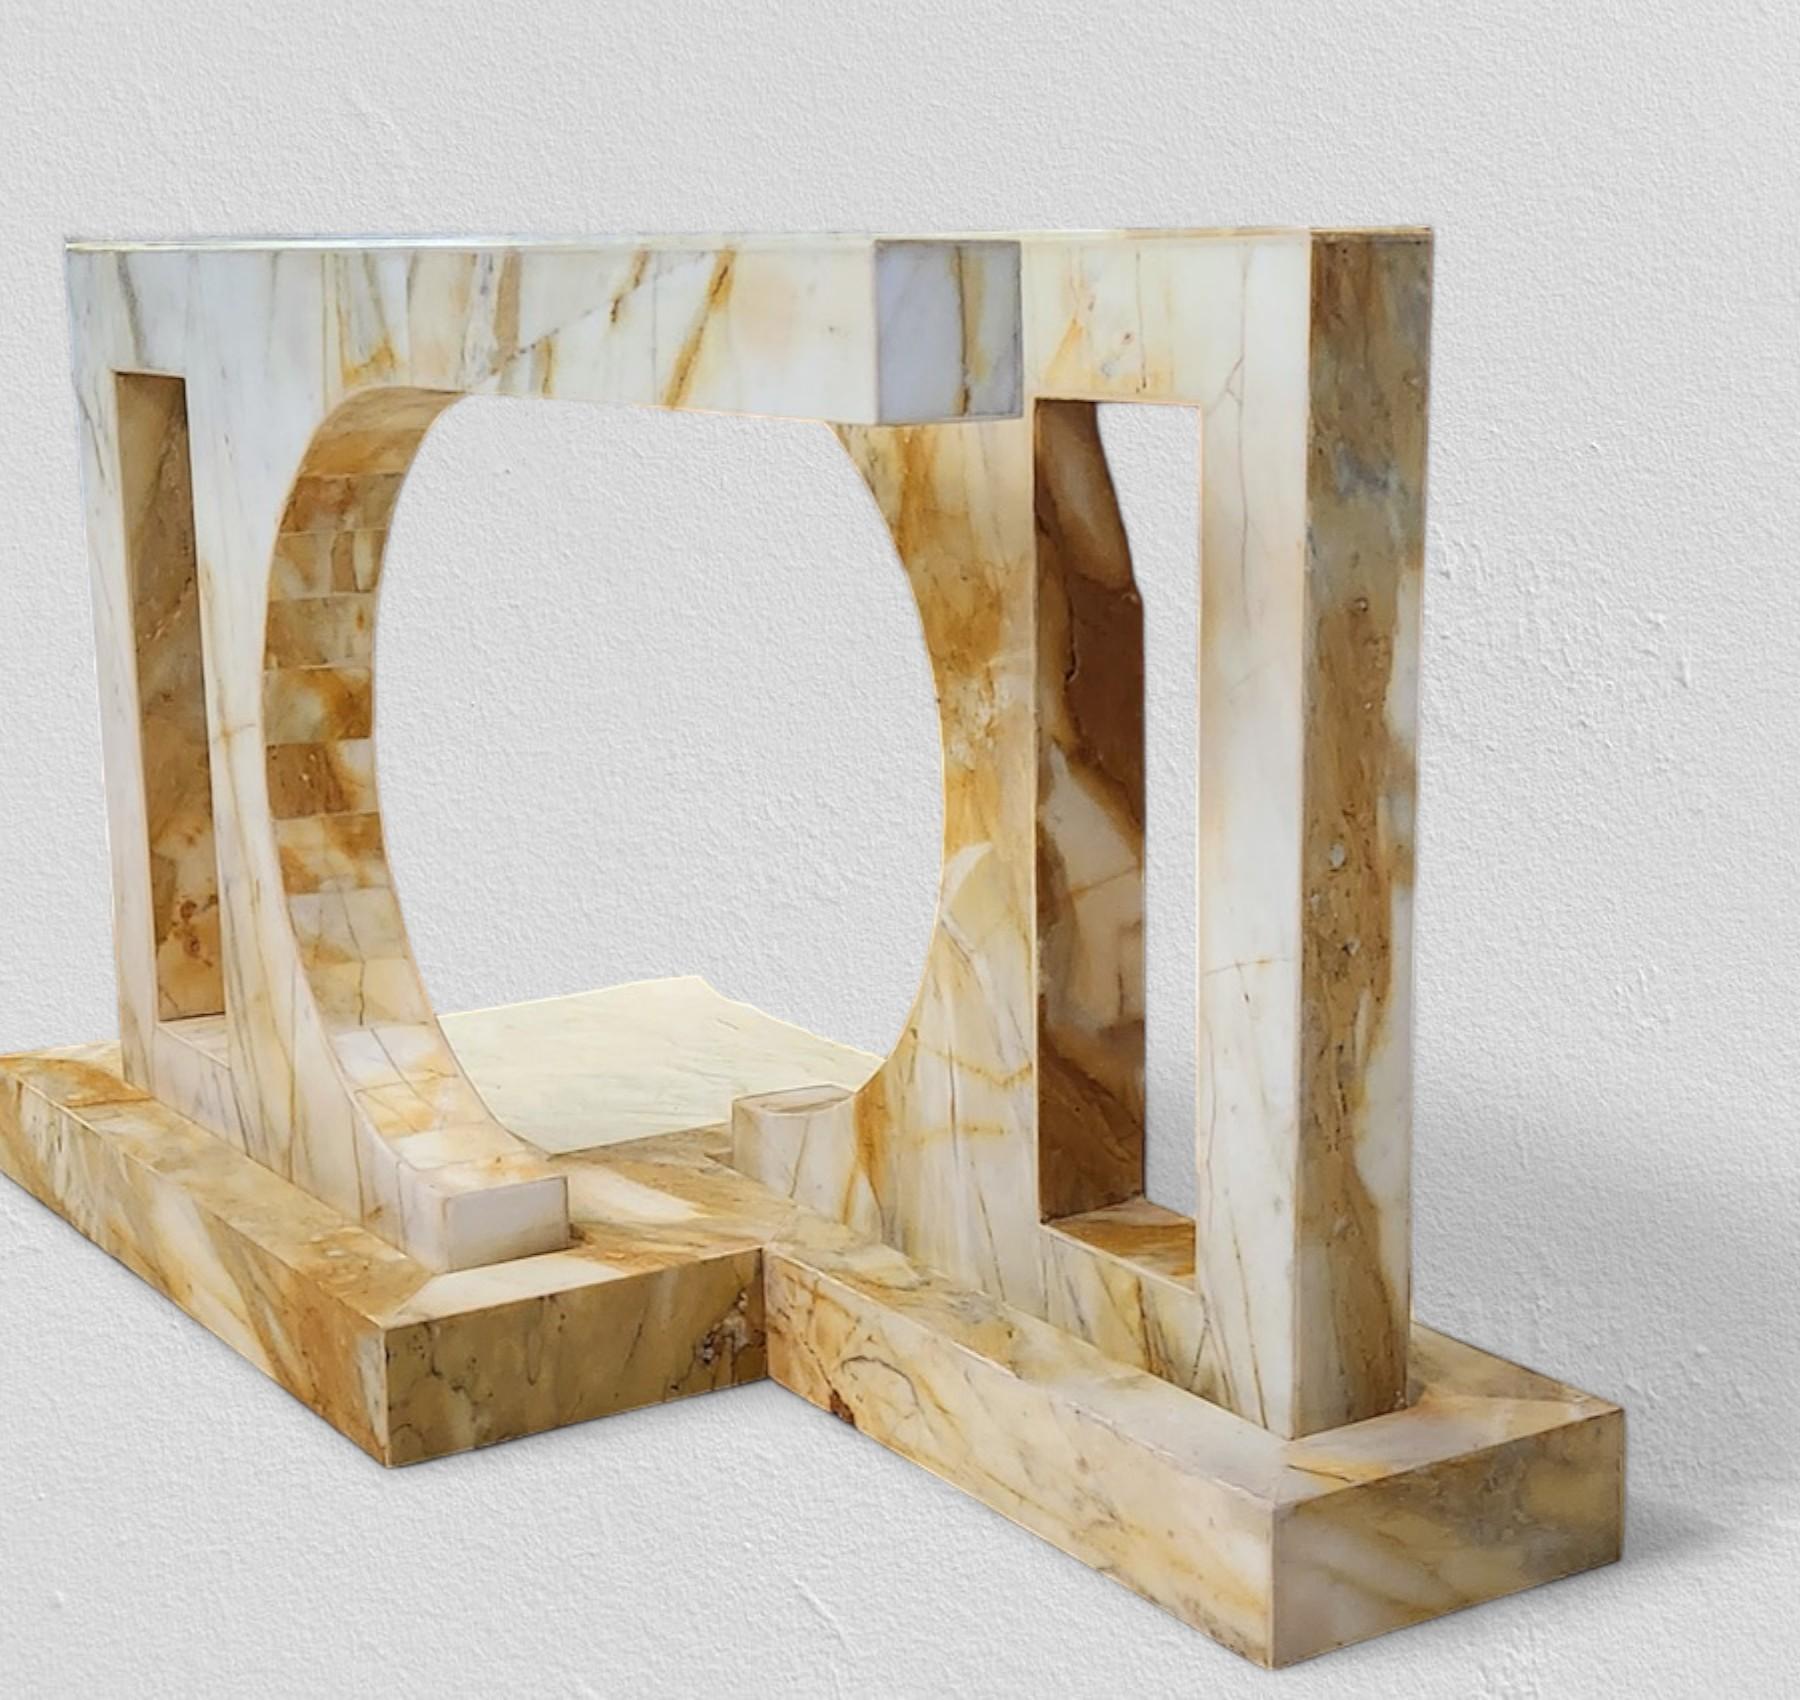 Marble Table/ Console Base by Paul Puccio Giallo Siena 1976 Brooklyn New York For Sale 6